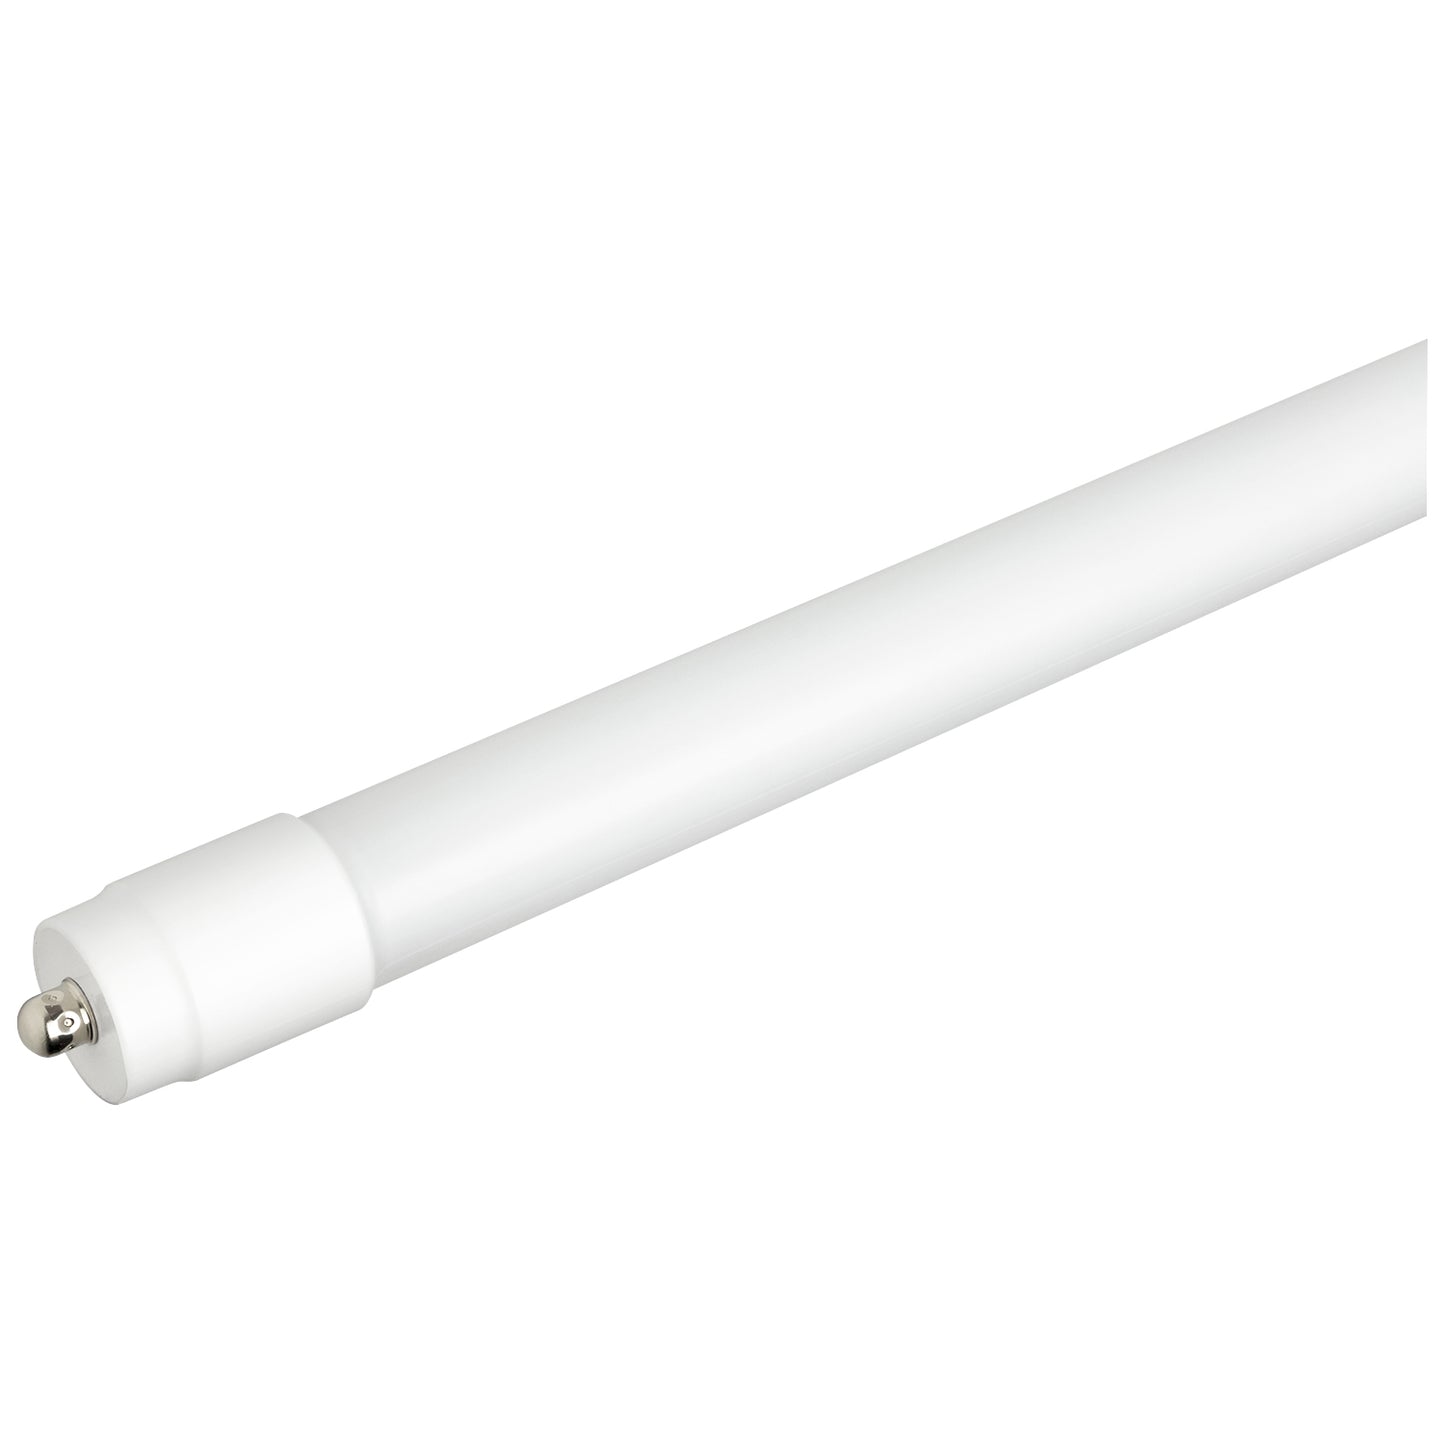 Sunlite T8/LED/ADV/8'/40W/40K LED T8 40W 8 Foot Bypass Dual End Single Pin Base, 4000K Cool White with PET Coating (10 Pack)